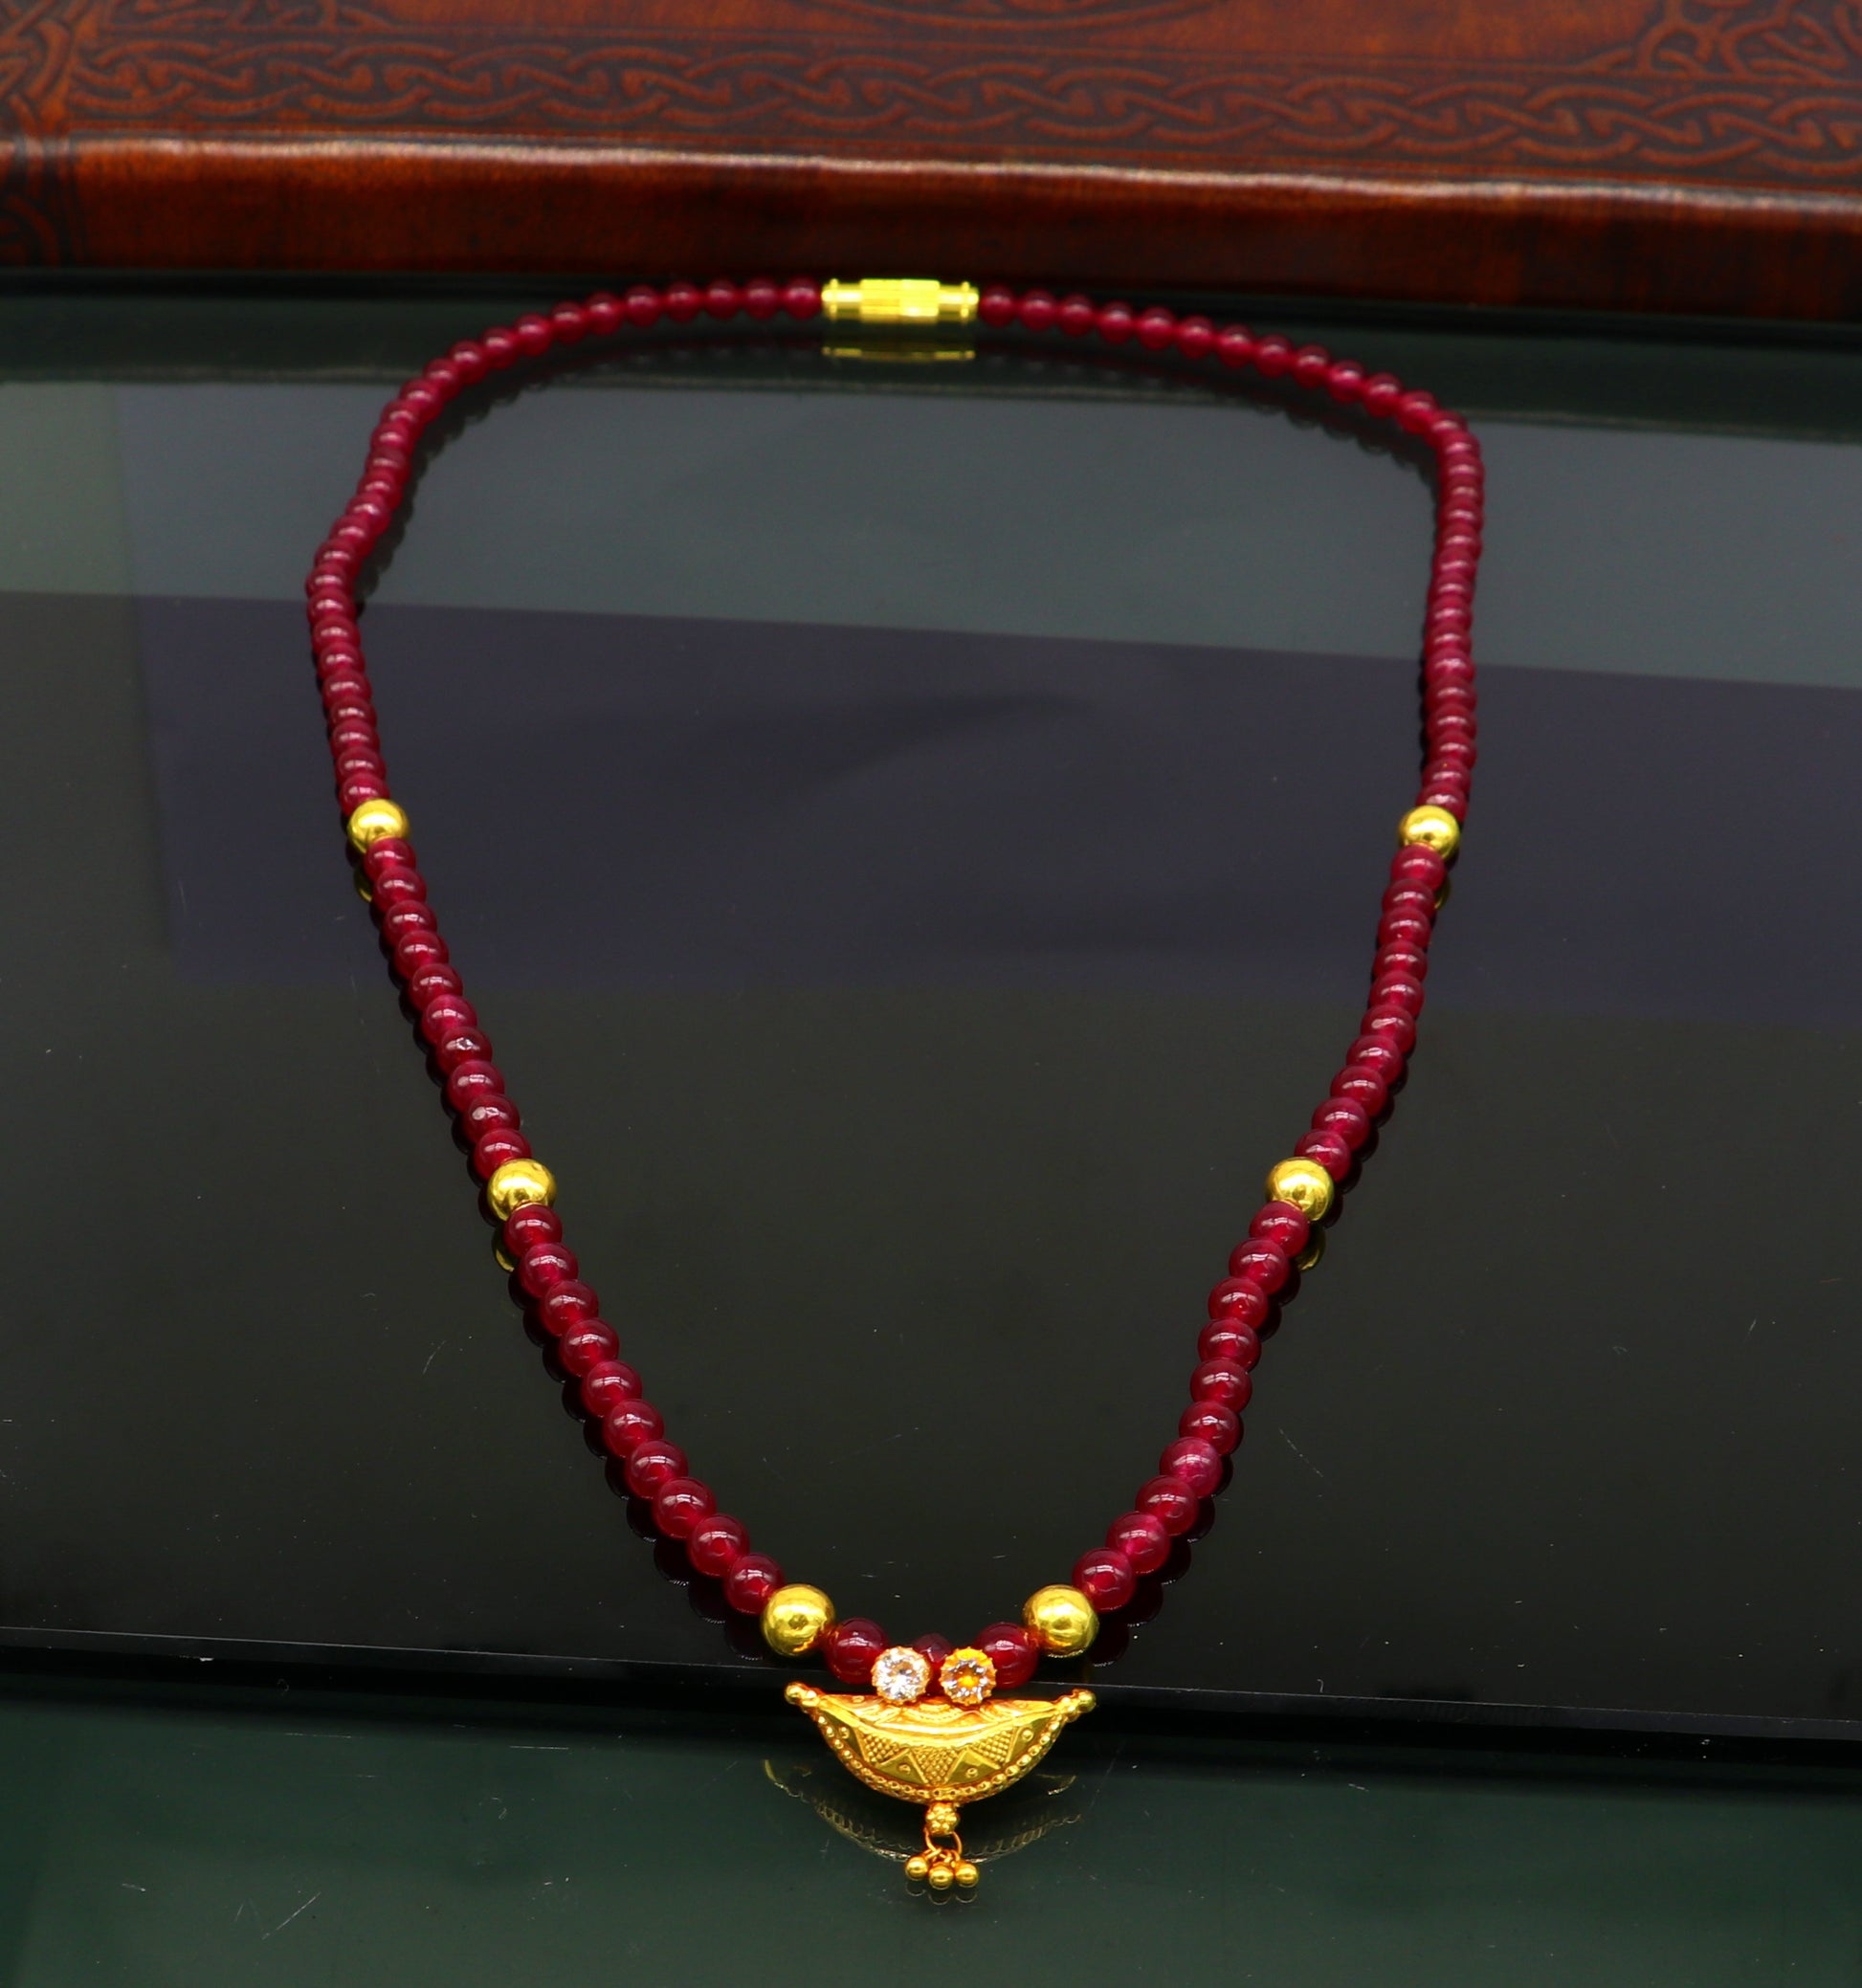 Vintage design handmade 20kt yellow gold amulet pendant with red color beaded necklace, fabulous girl's gift stylish tribal jewelry ap02 - TRIBAL ORNAMENTS